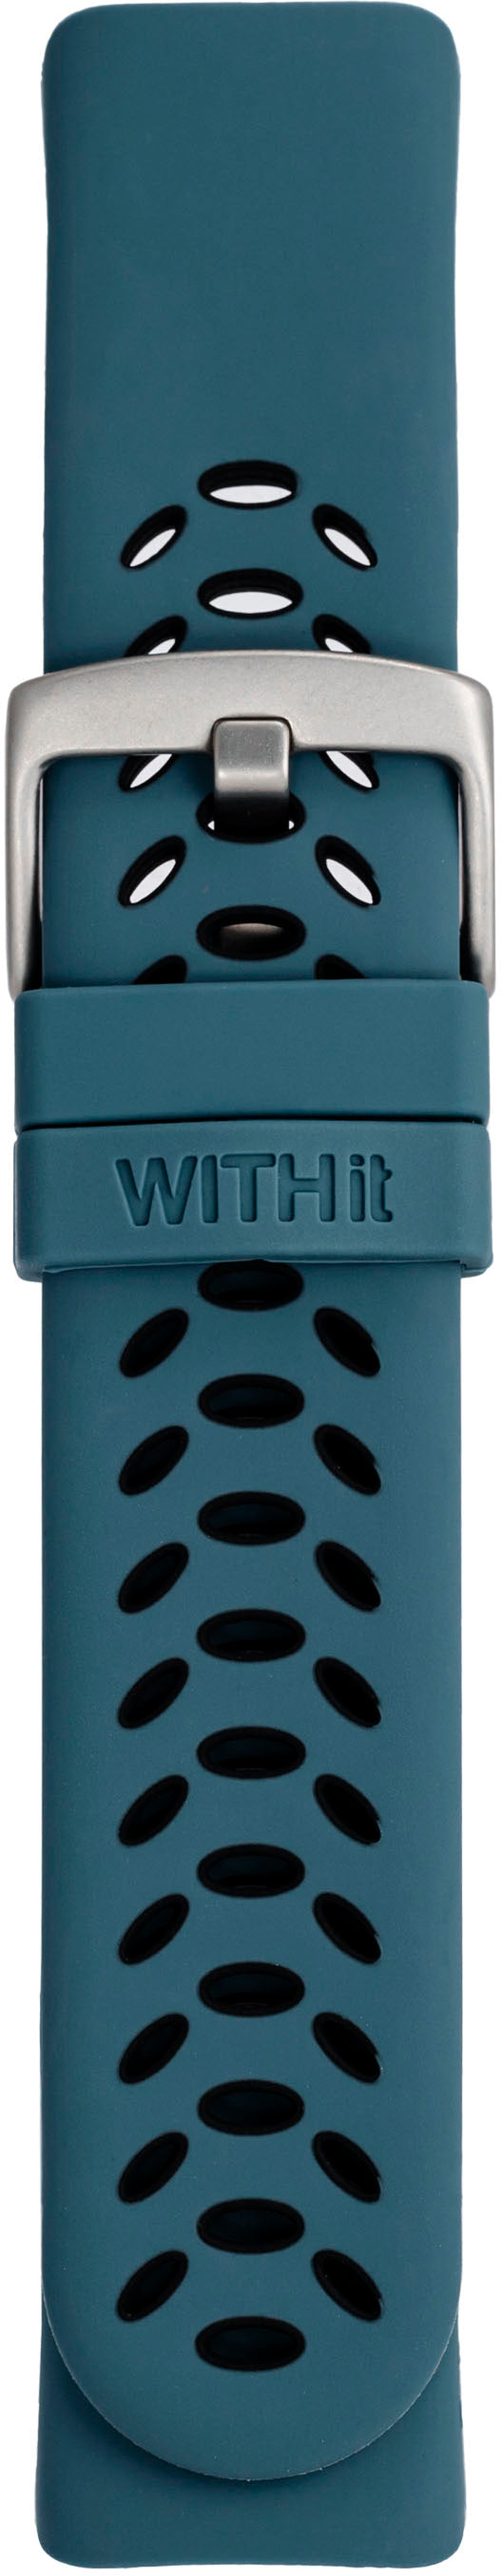 WITHit - Fitbit Charge 5 3-pack (black mesh, bluestone sport and black woven) - Woven Black/Bluestone/Black_7